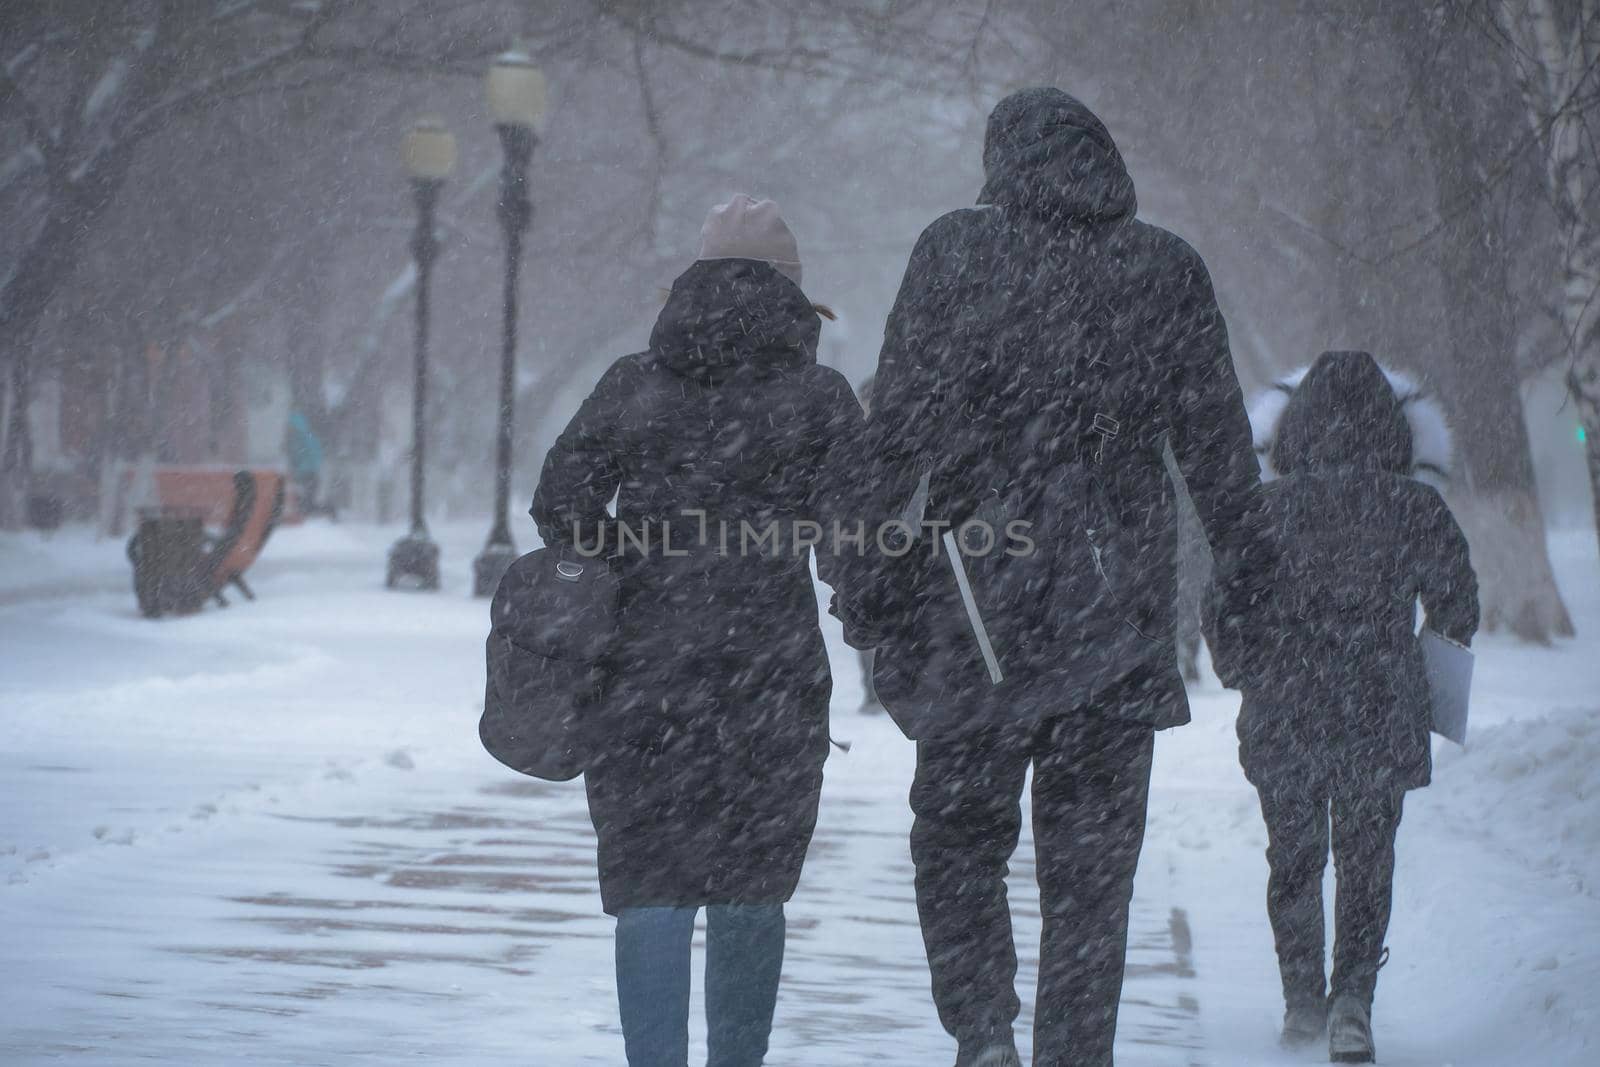 A snow-covered road with people in a storm,blizzard or snowfall in winter in bad weather in the city.Extreme winter weather conditions in the north.People walk through the streets under heavy snowfall by YevgeniySam